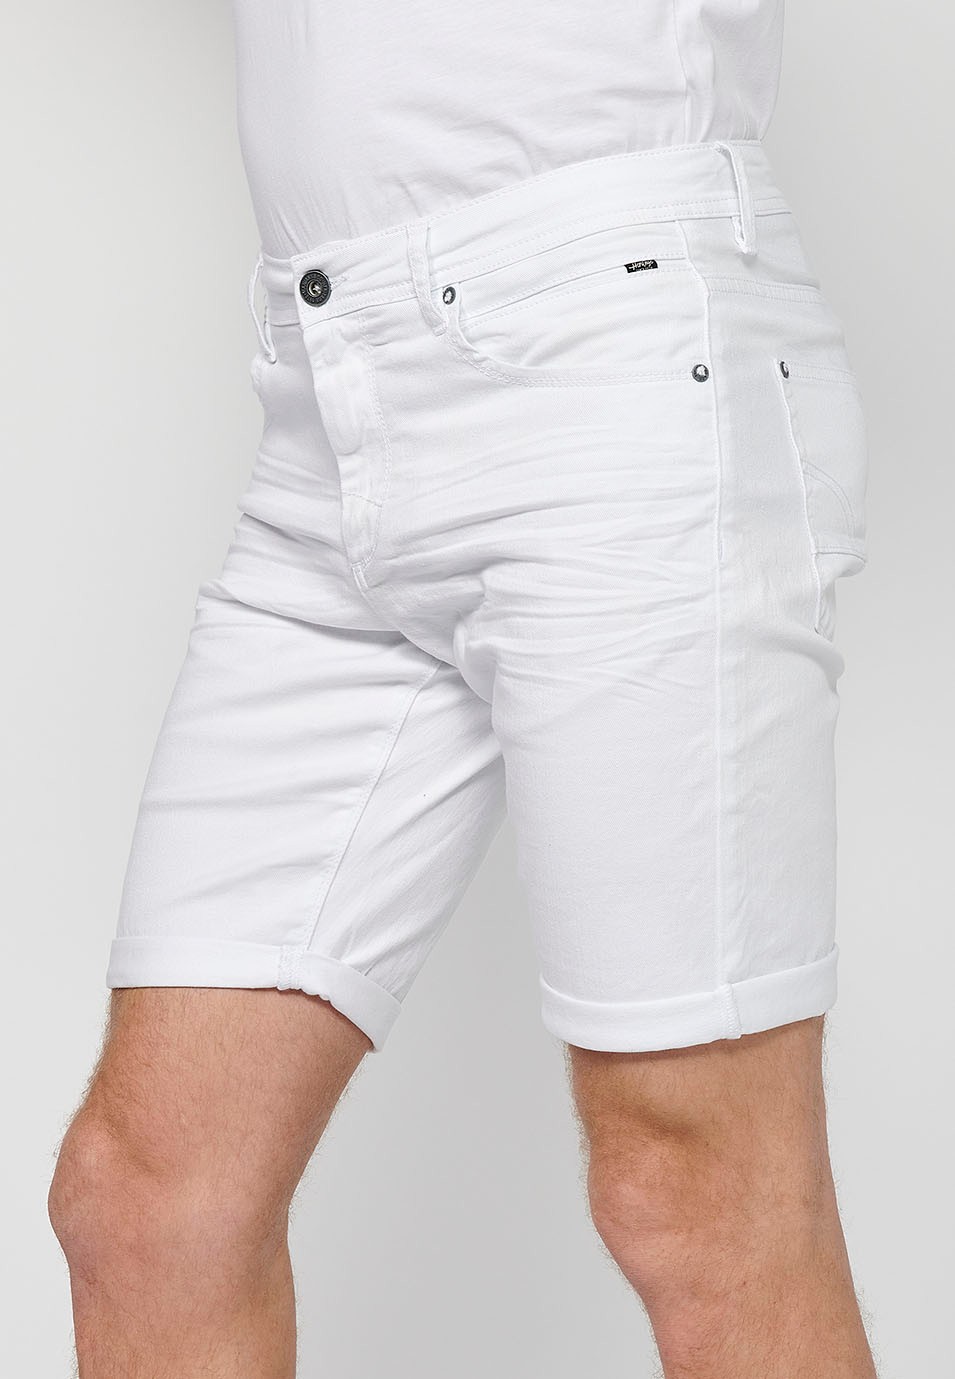 Denim Bermuda shorts with cuffed finish and front zipper and button closure. Five pockets, one match pocket, White for Men 2